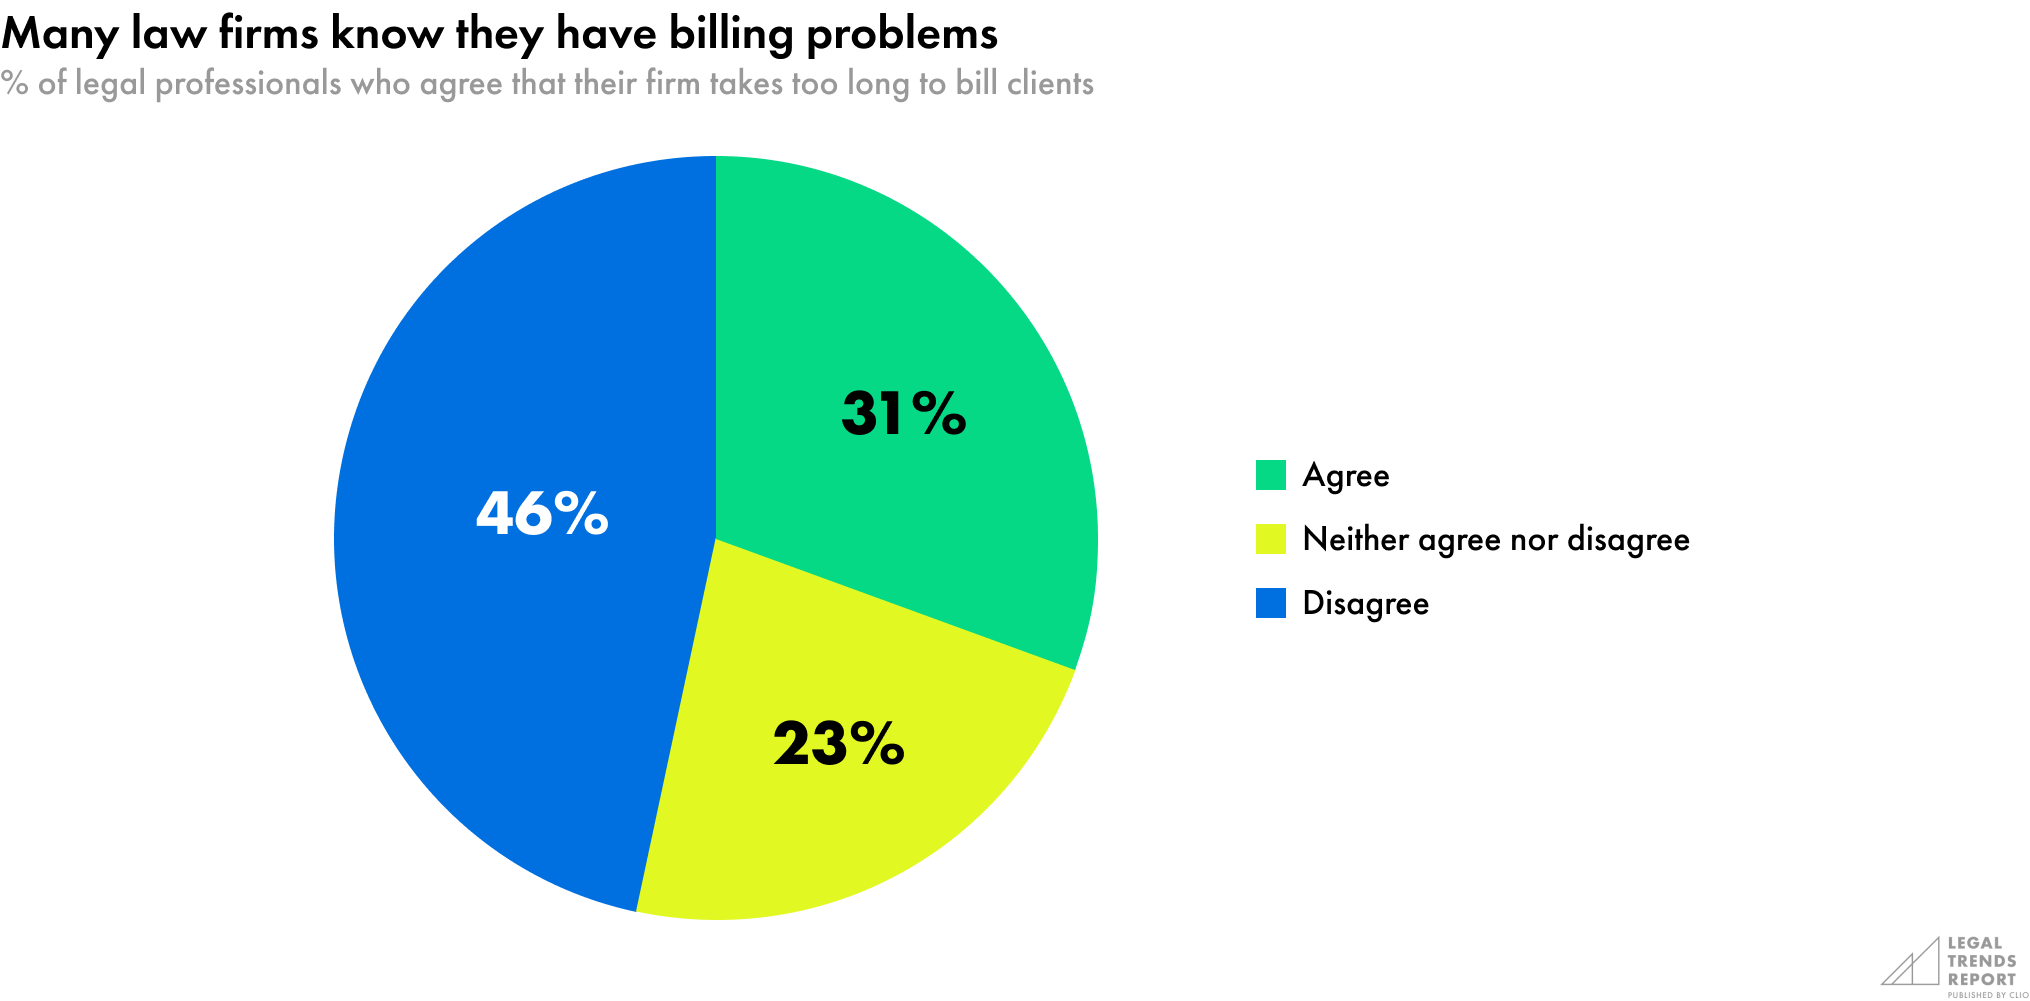 Many law firms know they have billing problems